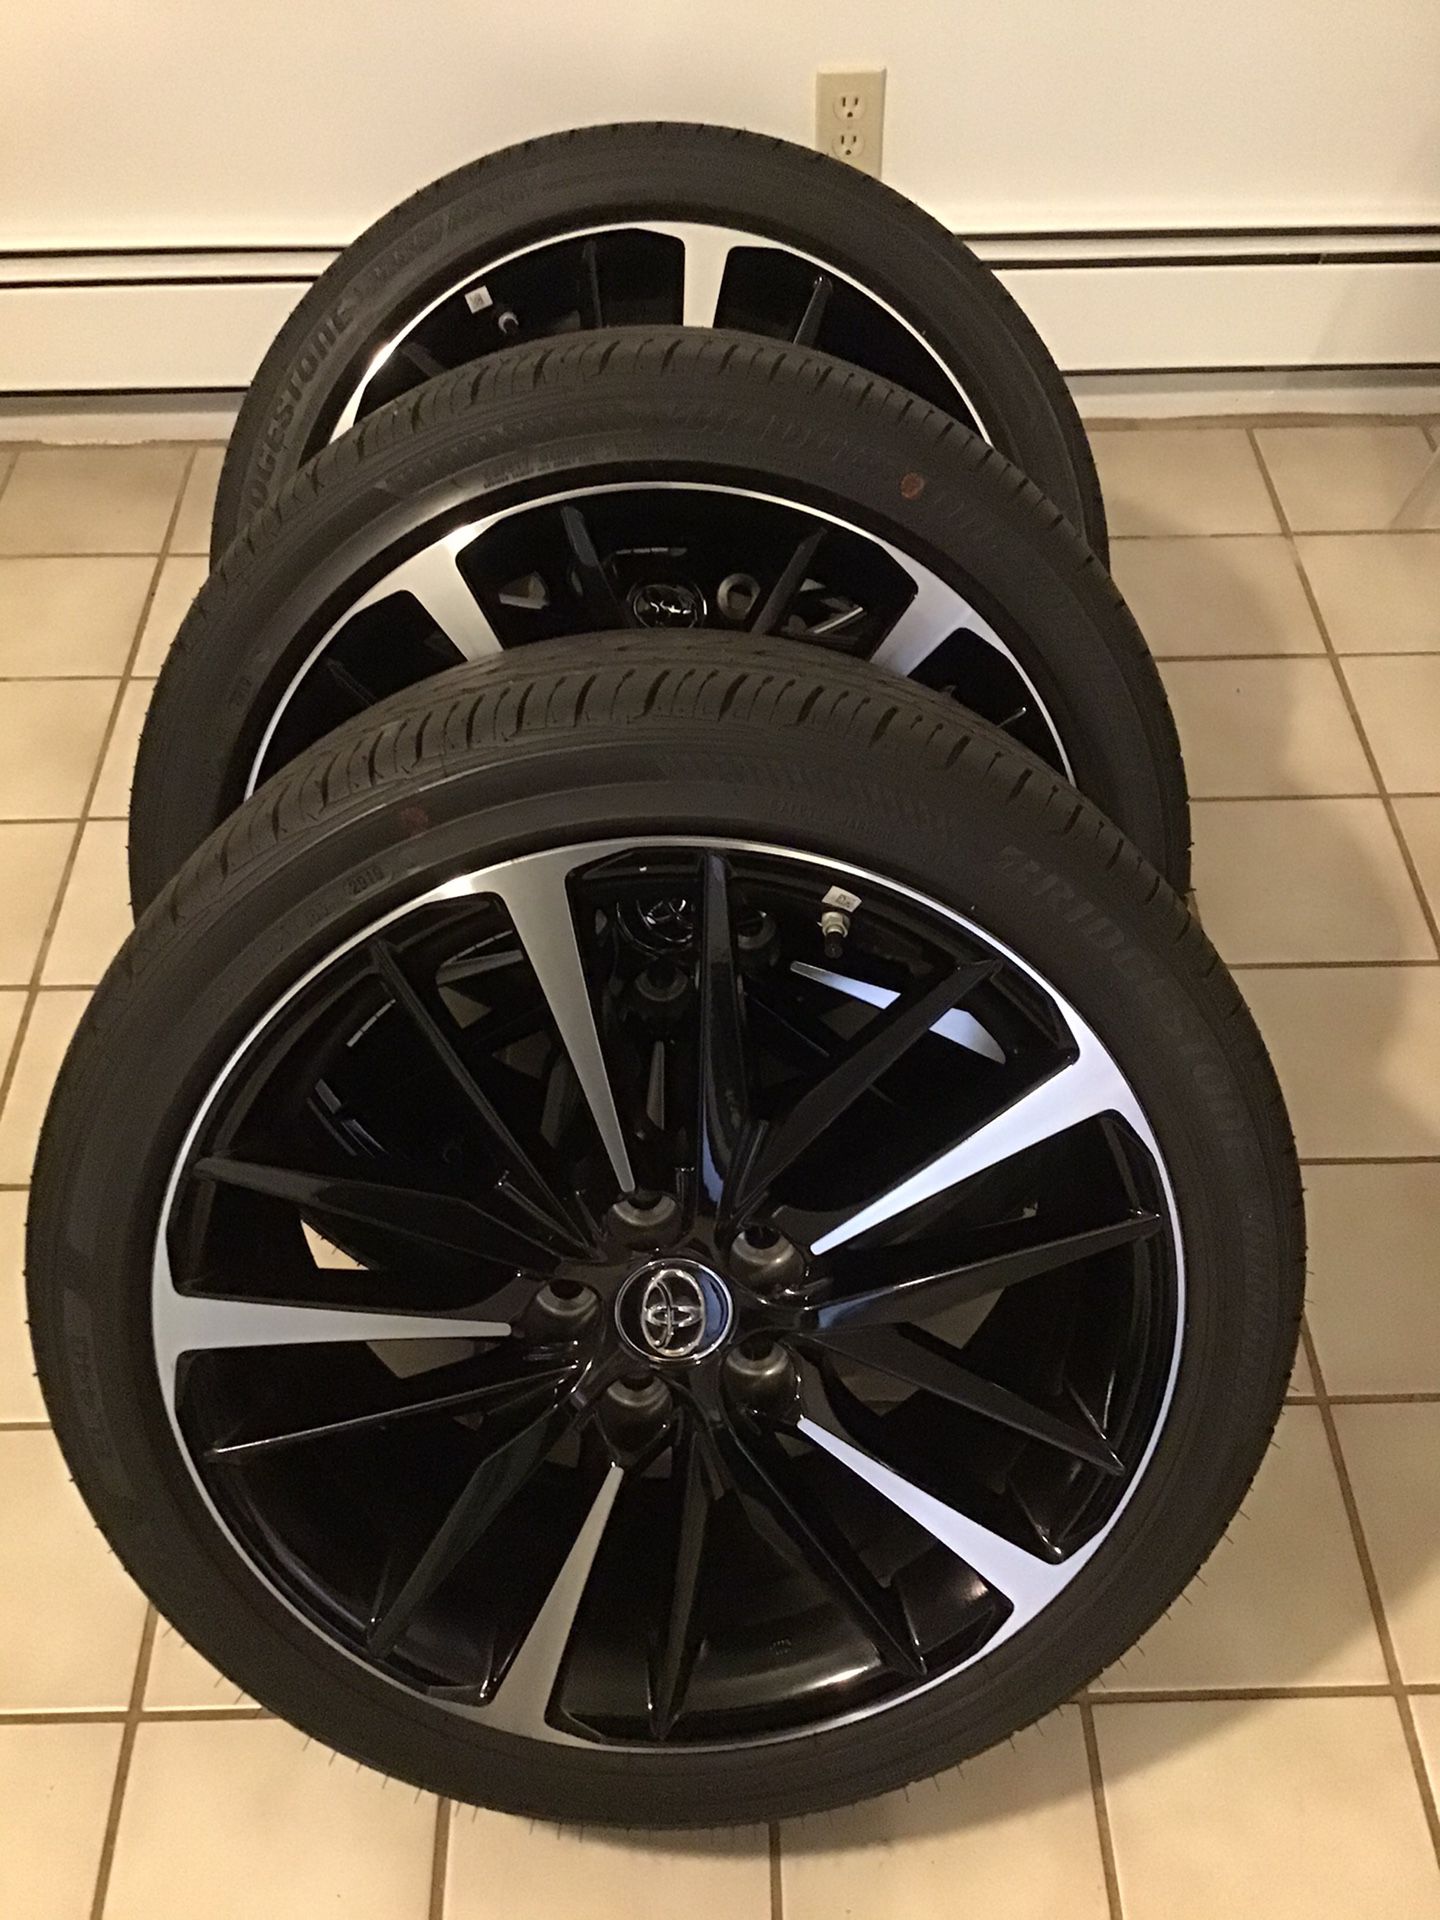 2019 Toyota Camry XSE 19" Rims and Tires